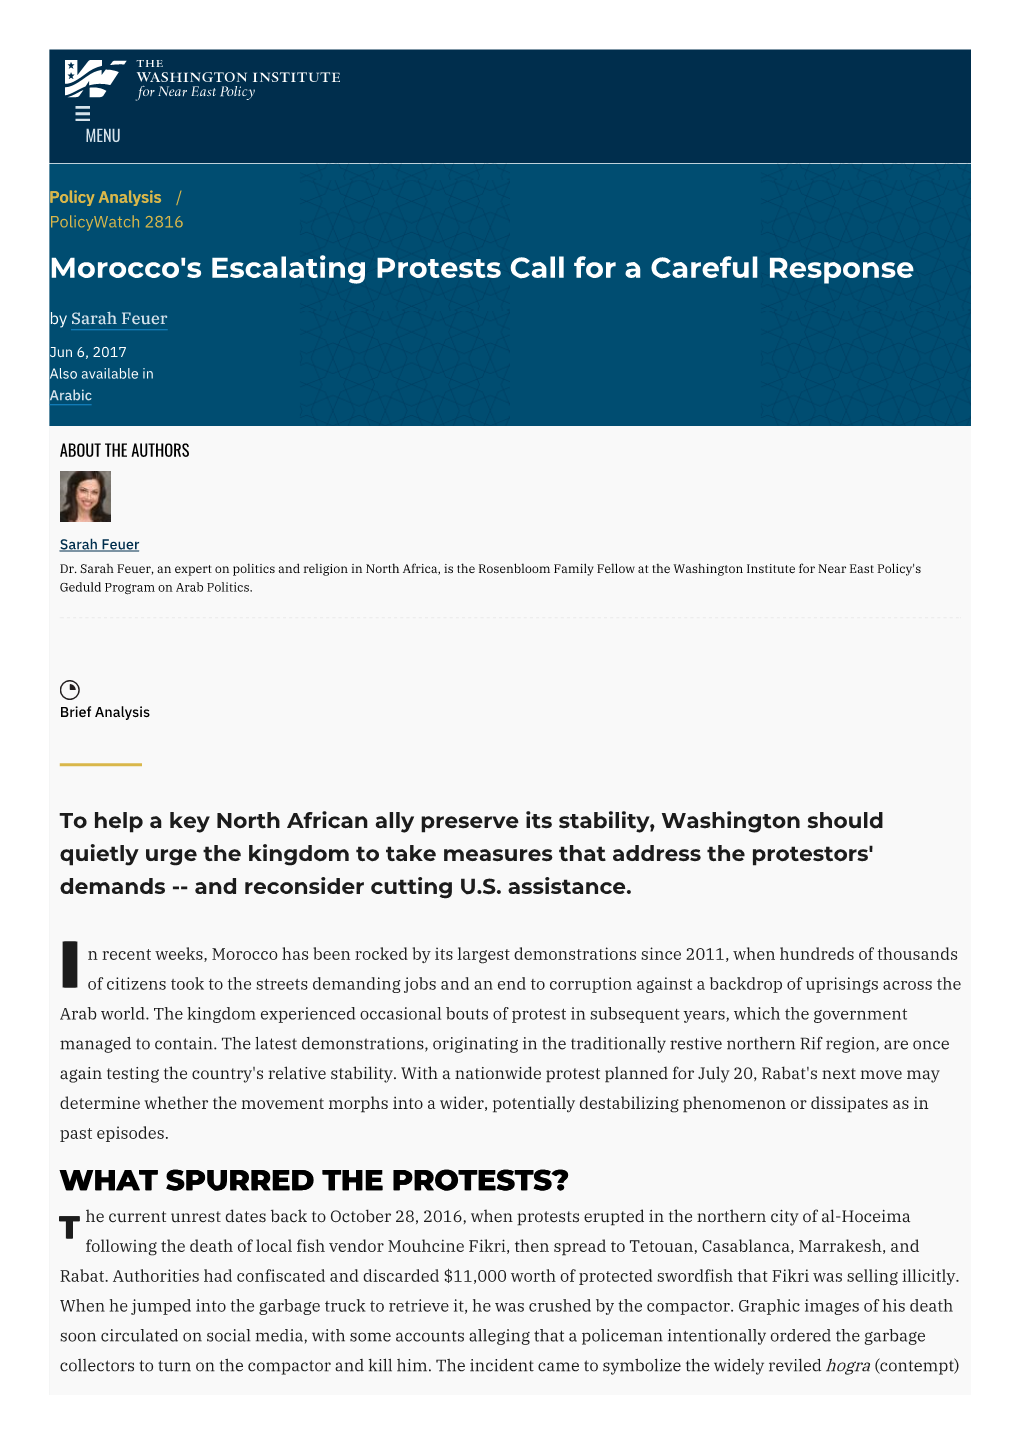 Morocco's Escalating Protests Call for a Careful Response by Sarah Feuer